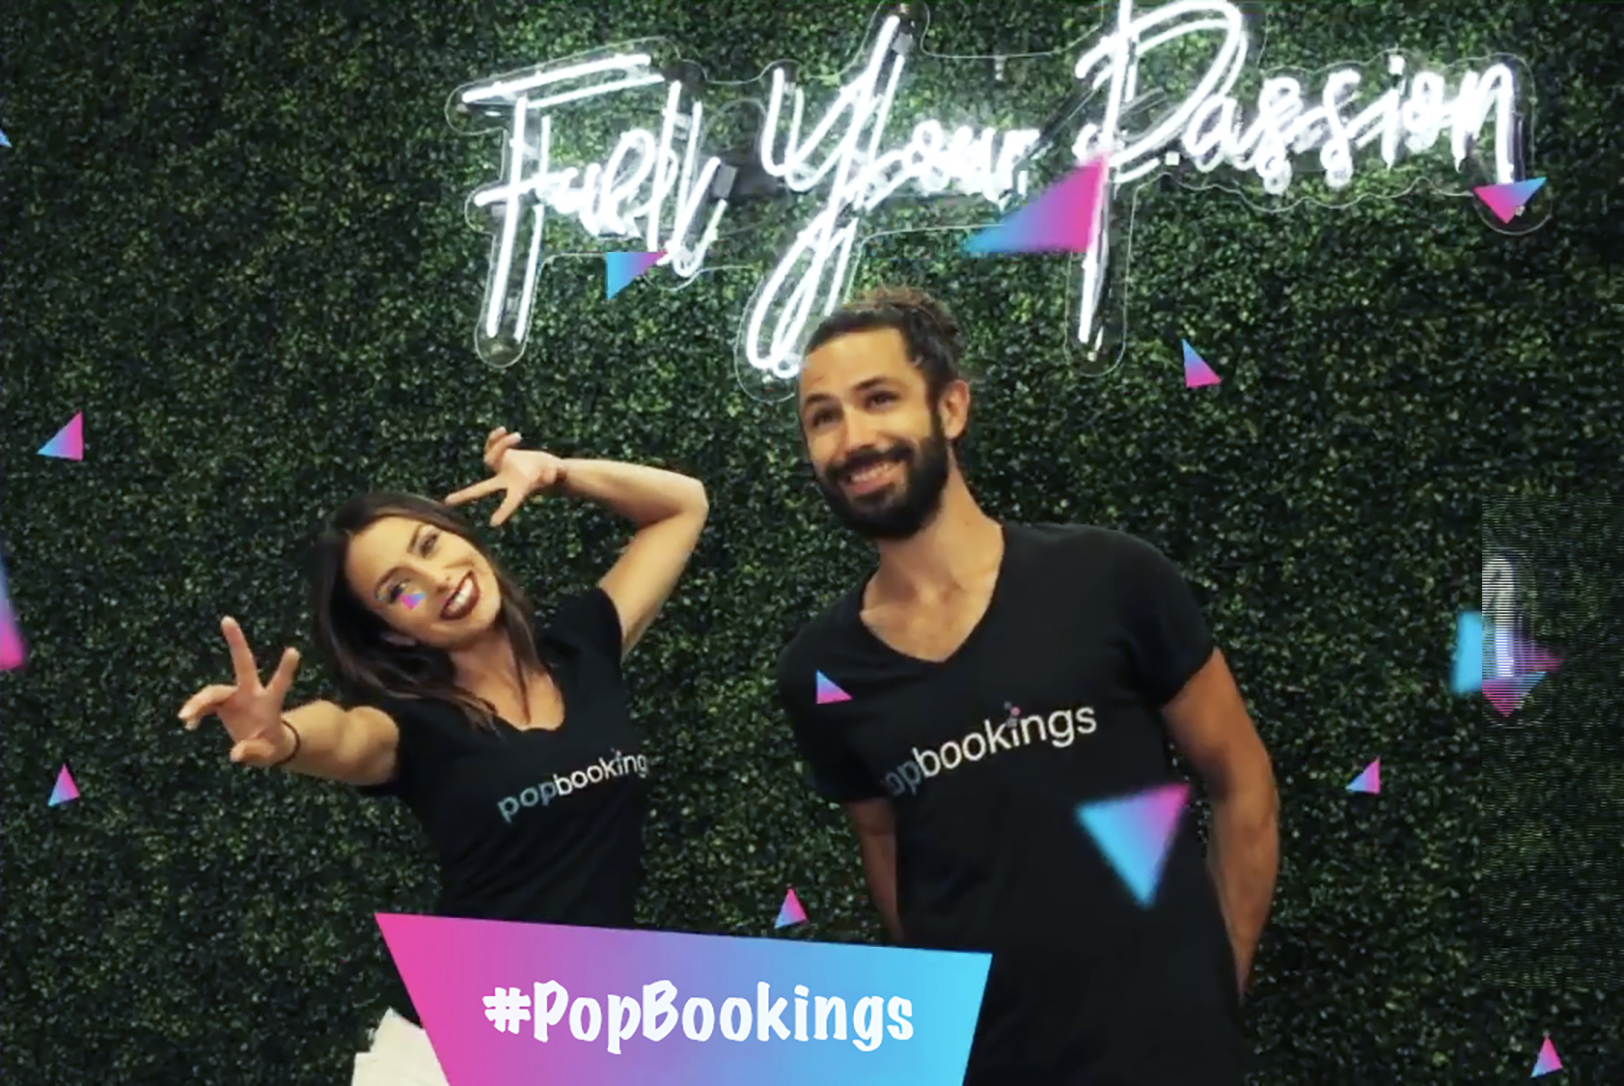 New Recruit self-service event staffing platform puts KC’s PopBookings in the big game